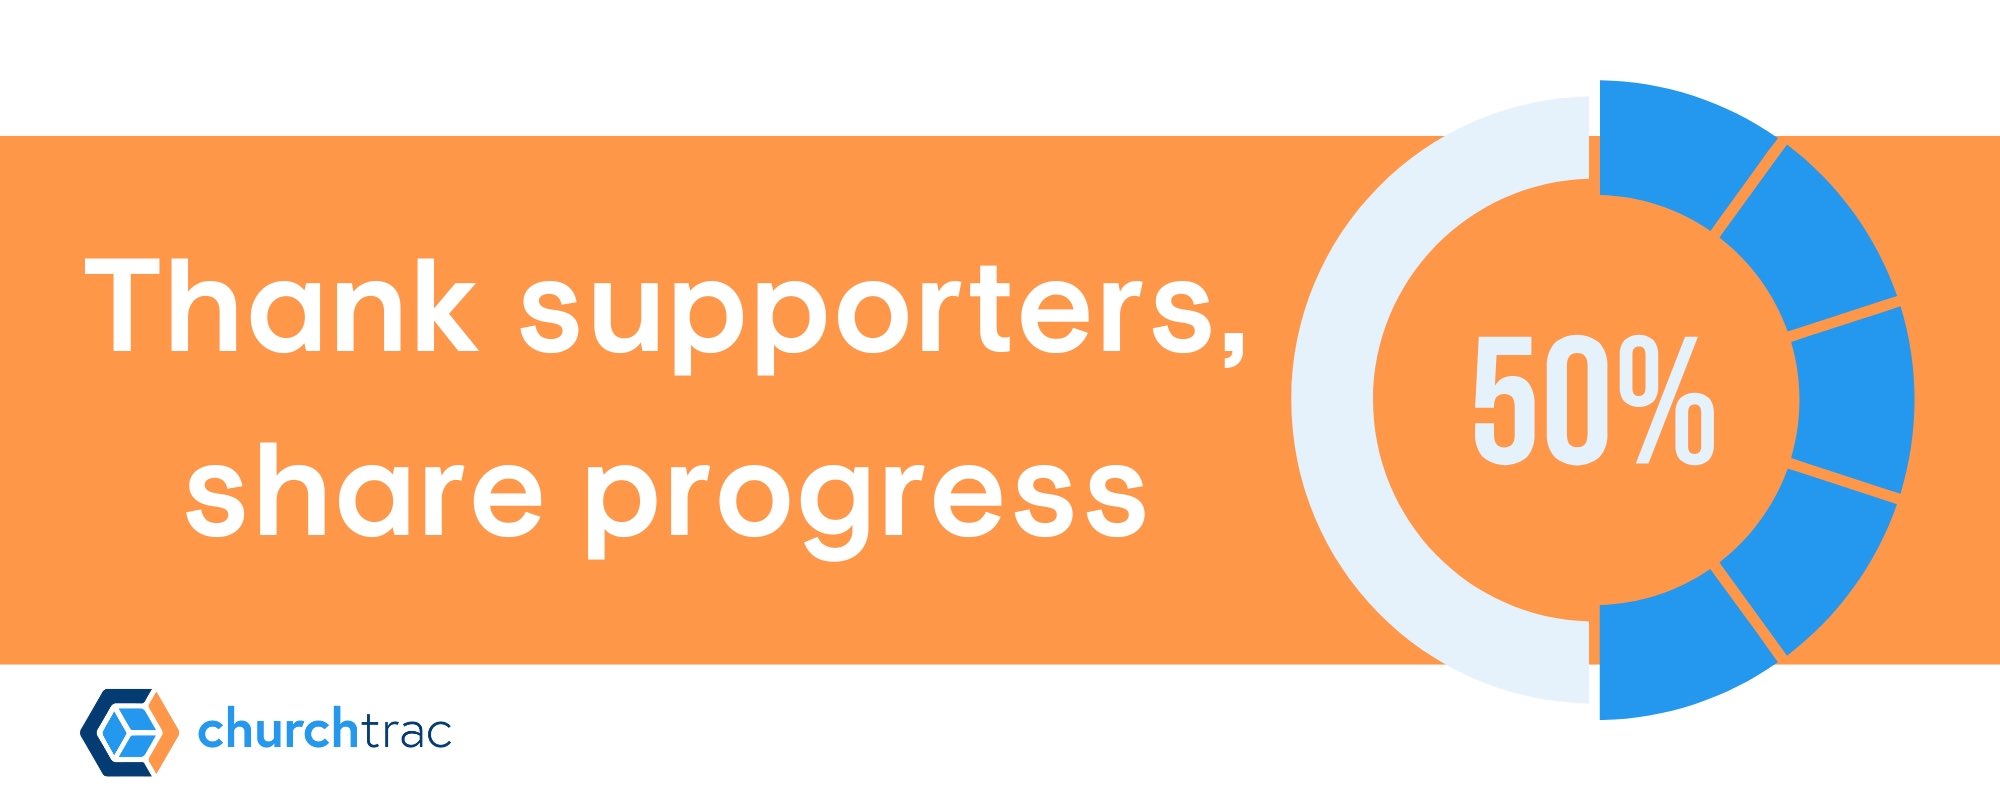 Send Progress Updates to your supporters